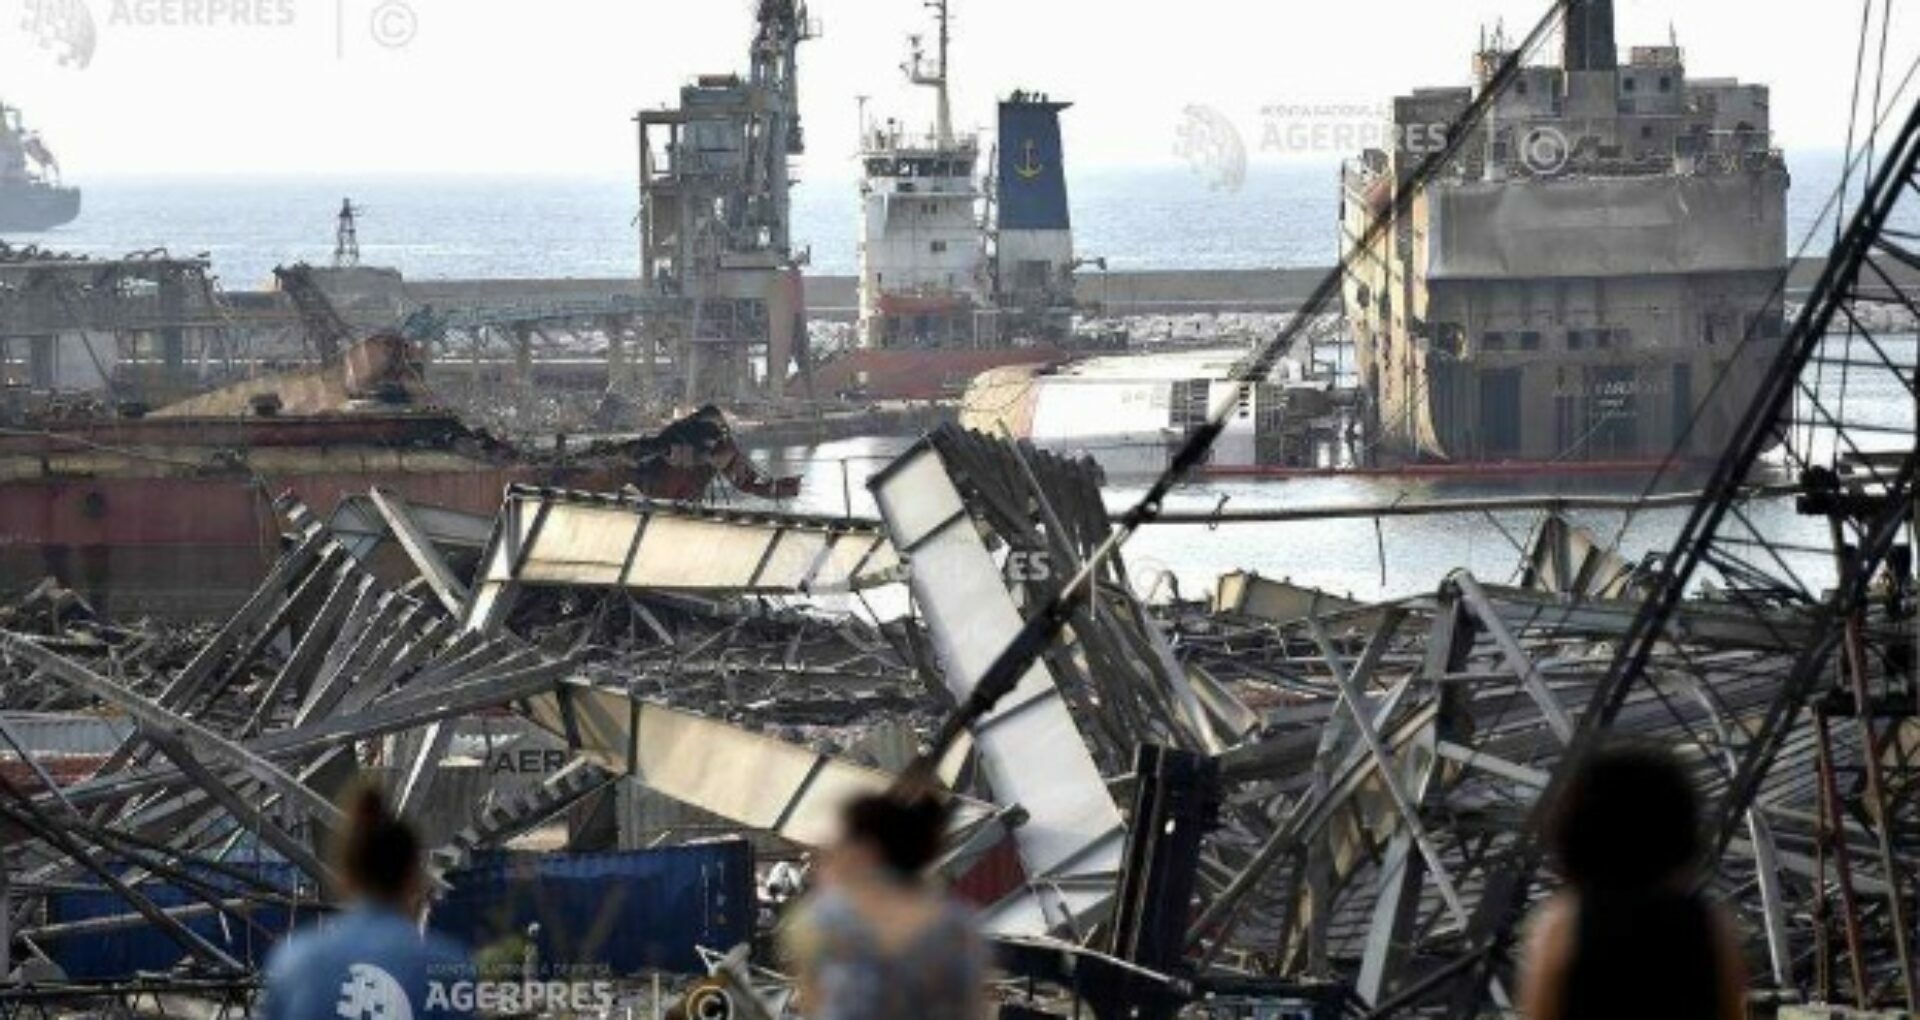 World Bank Reports: Beirut Explosion Caused Up to US$8.0 Billion in Damages to Infrastructure and Physical Assets